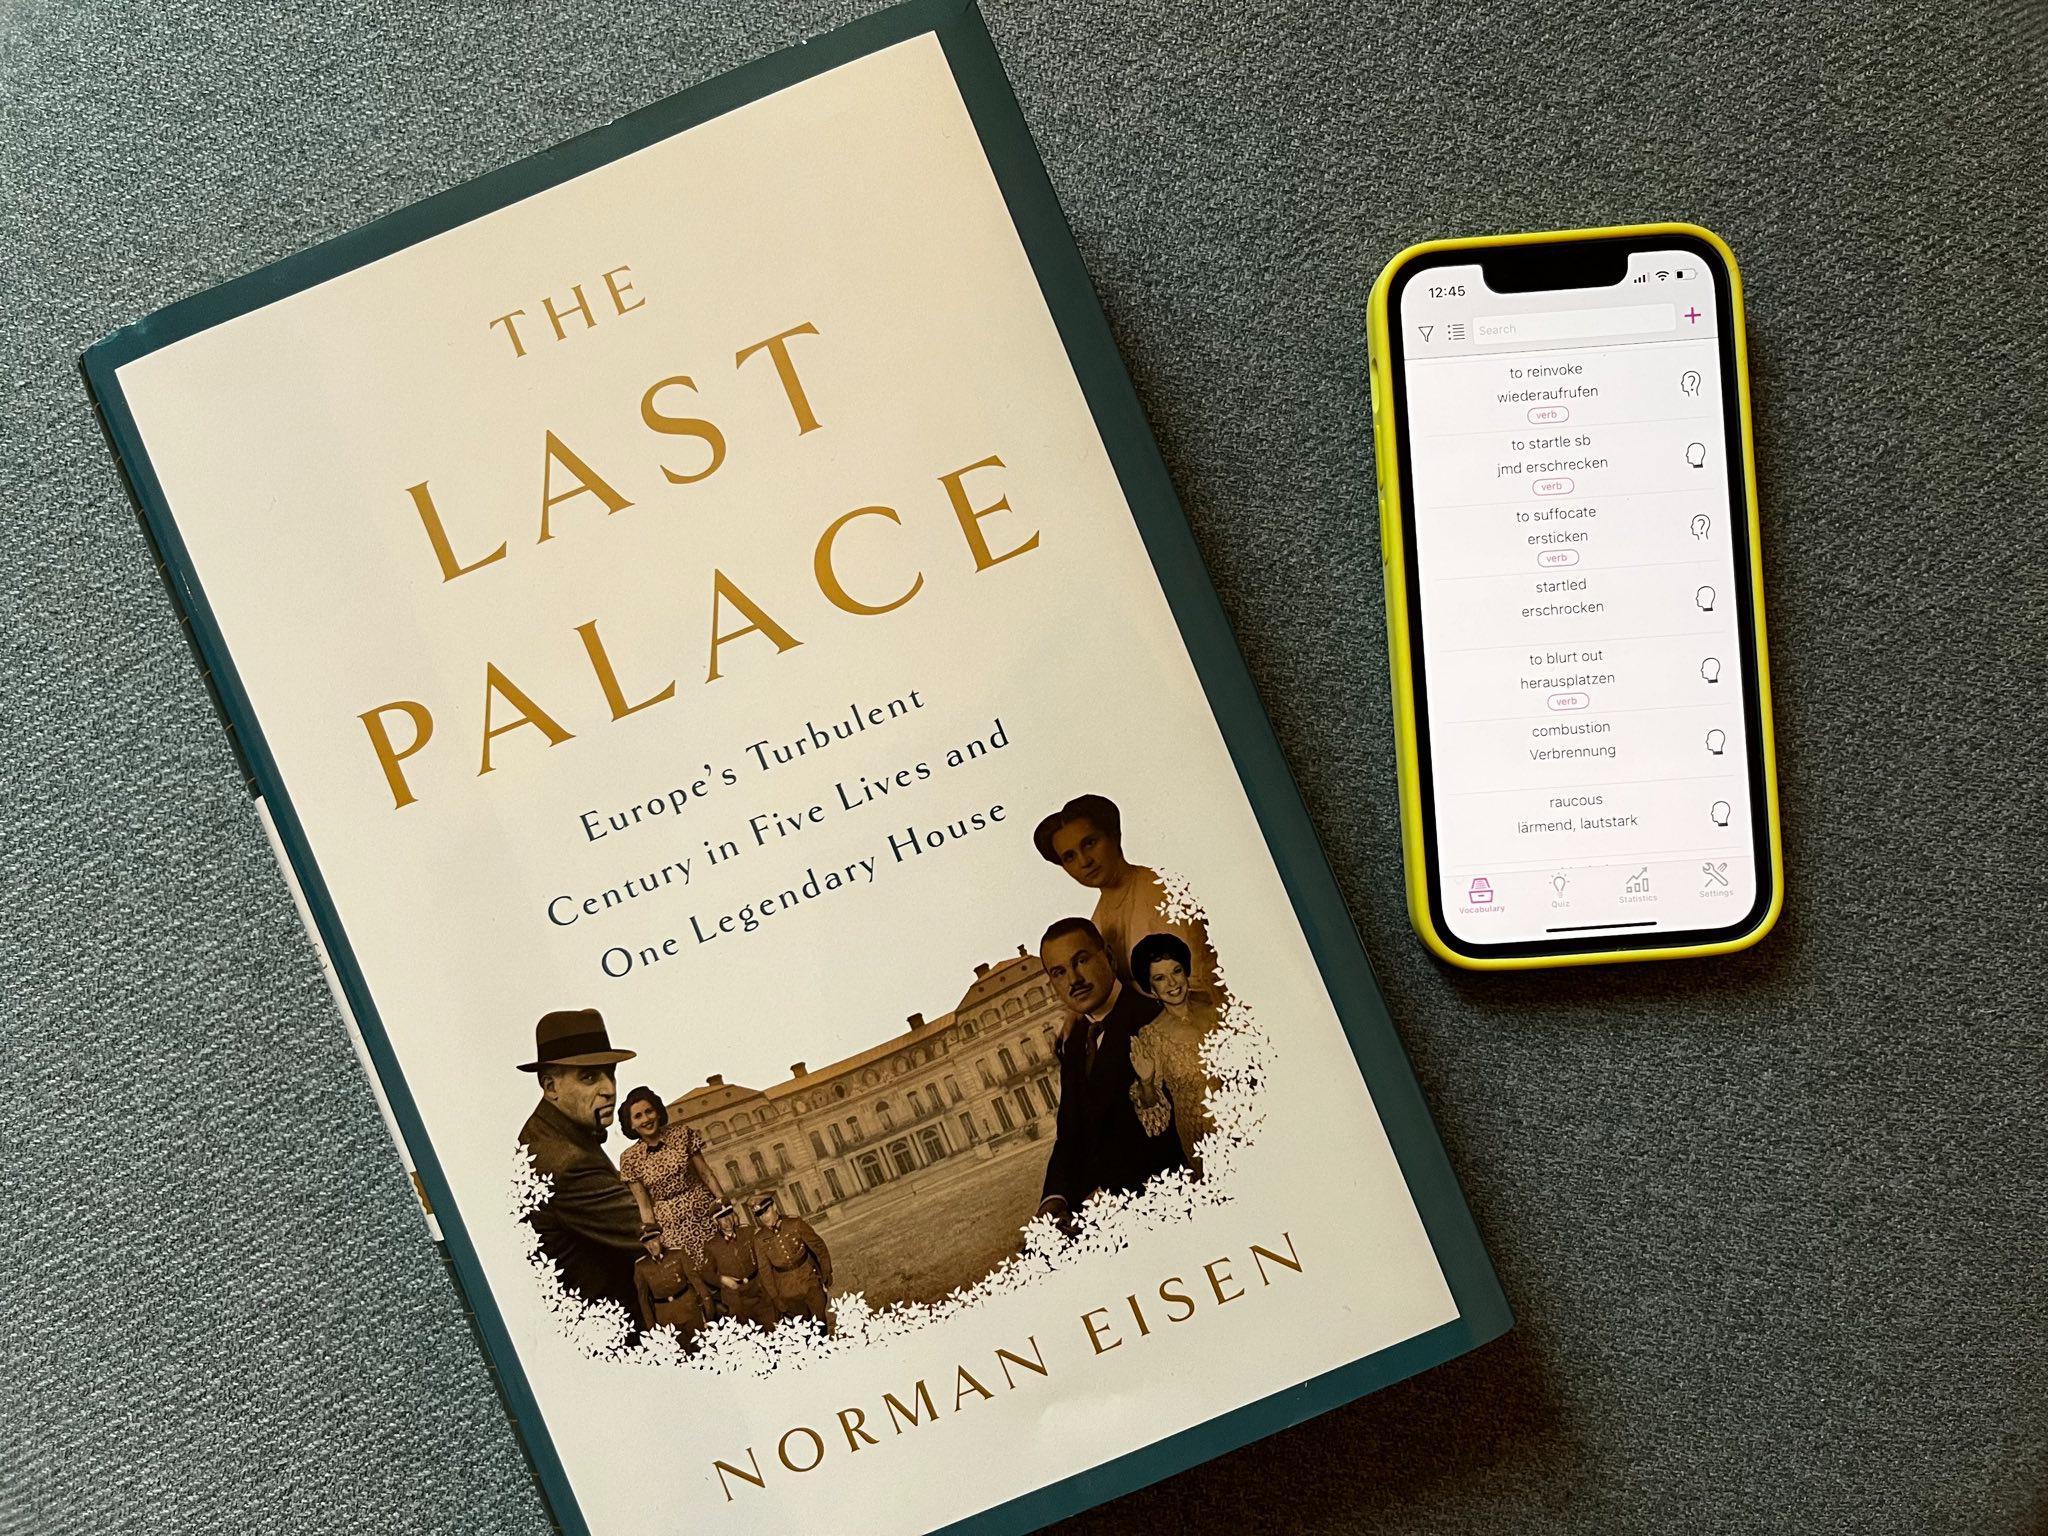 Foto of the book cover of The last palace and an iPhone with the open Wokabulary App.